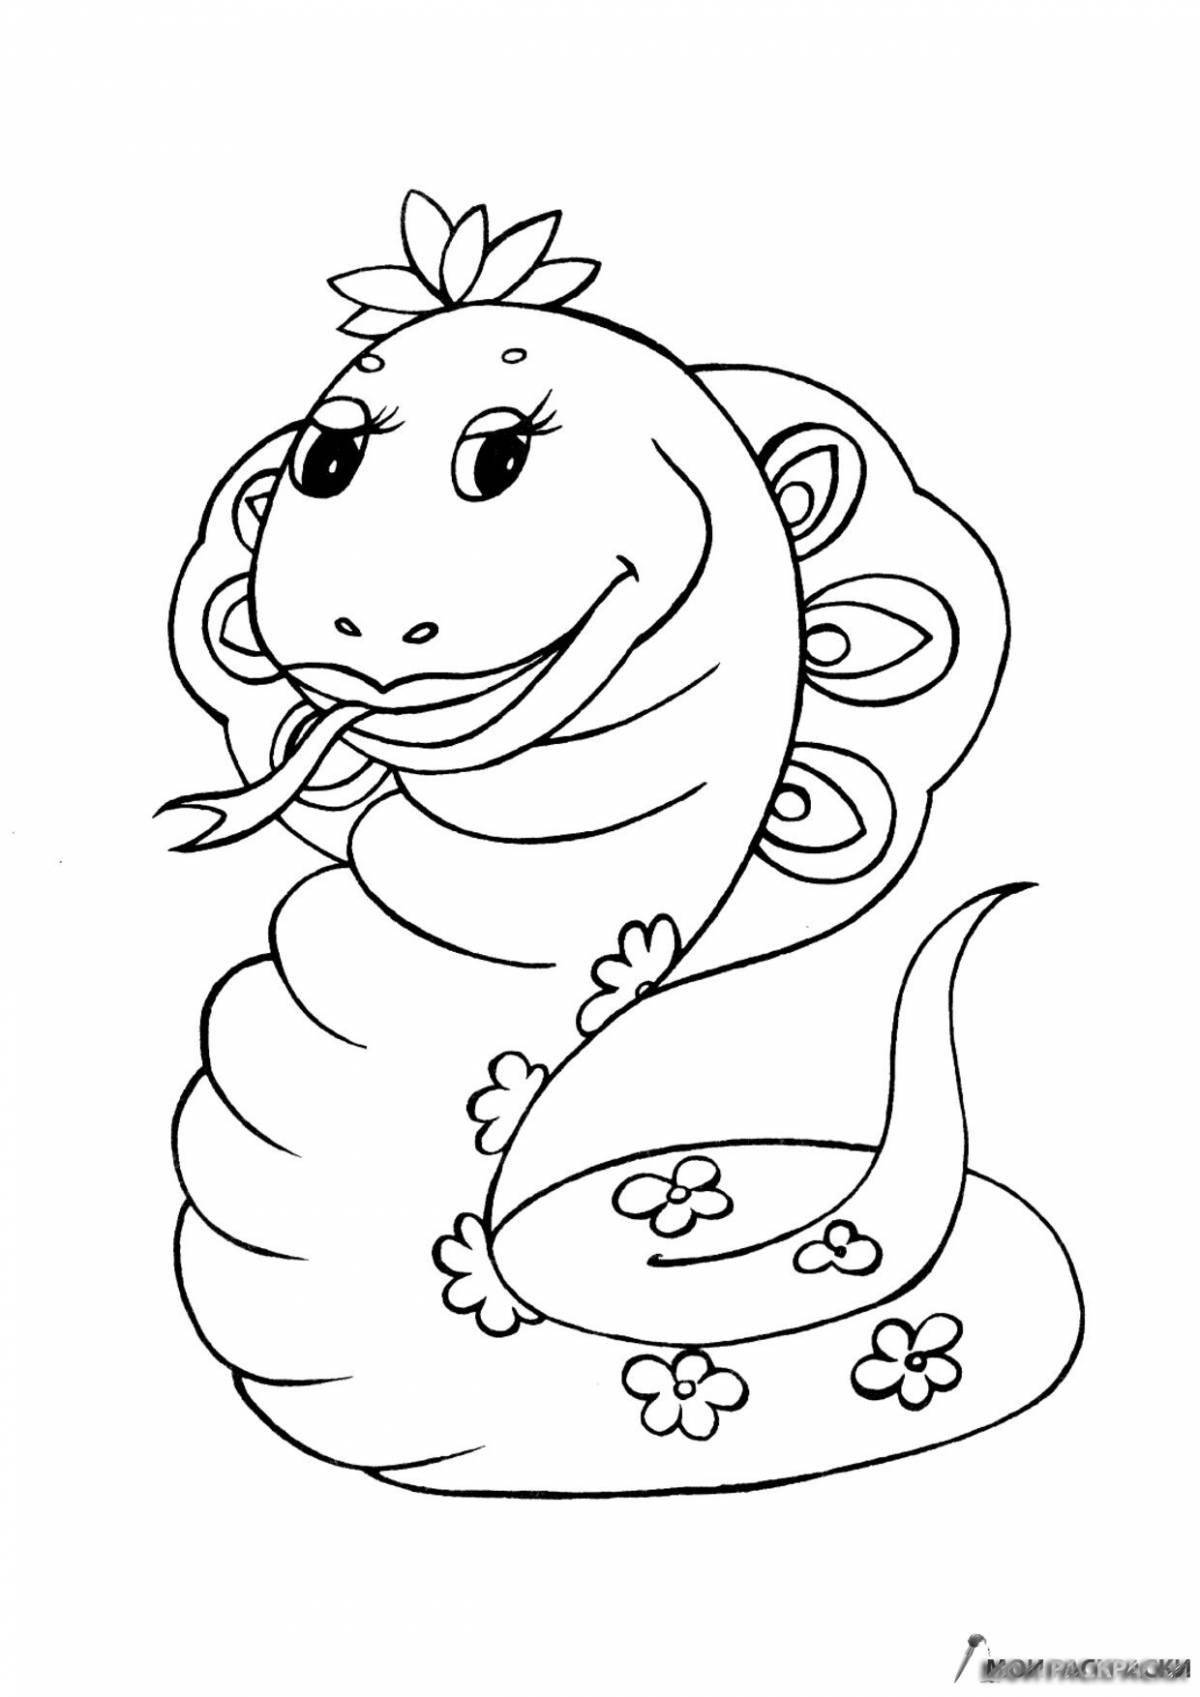 Brightly colored blue snake coloring page